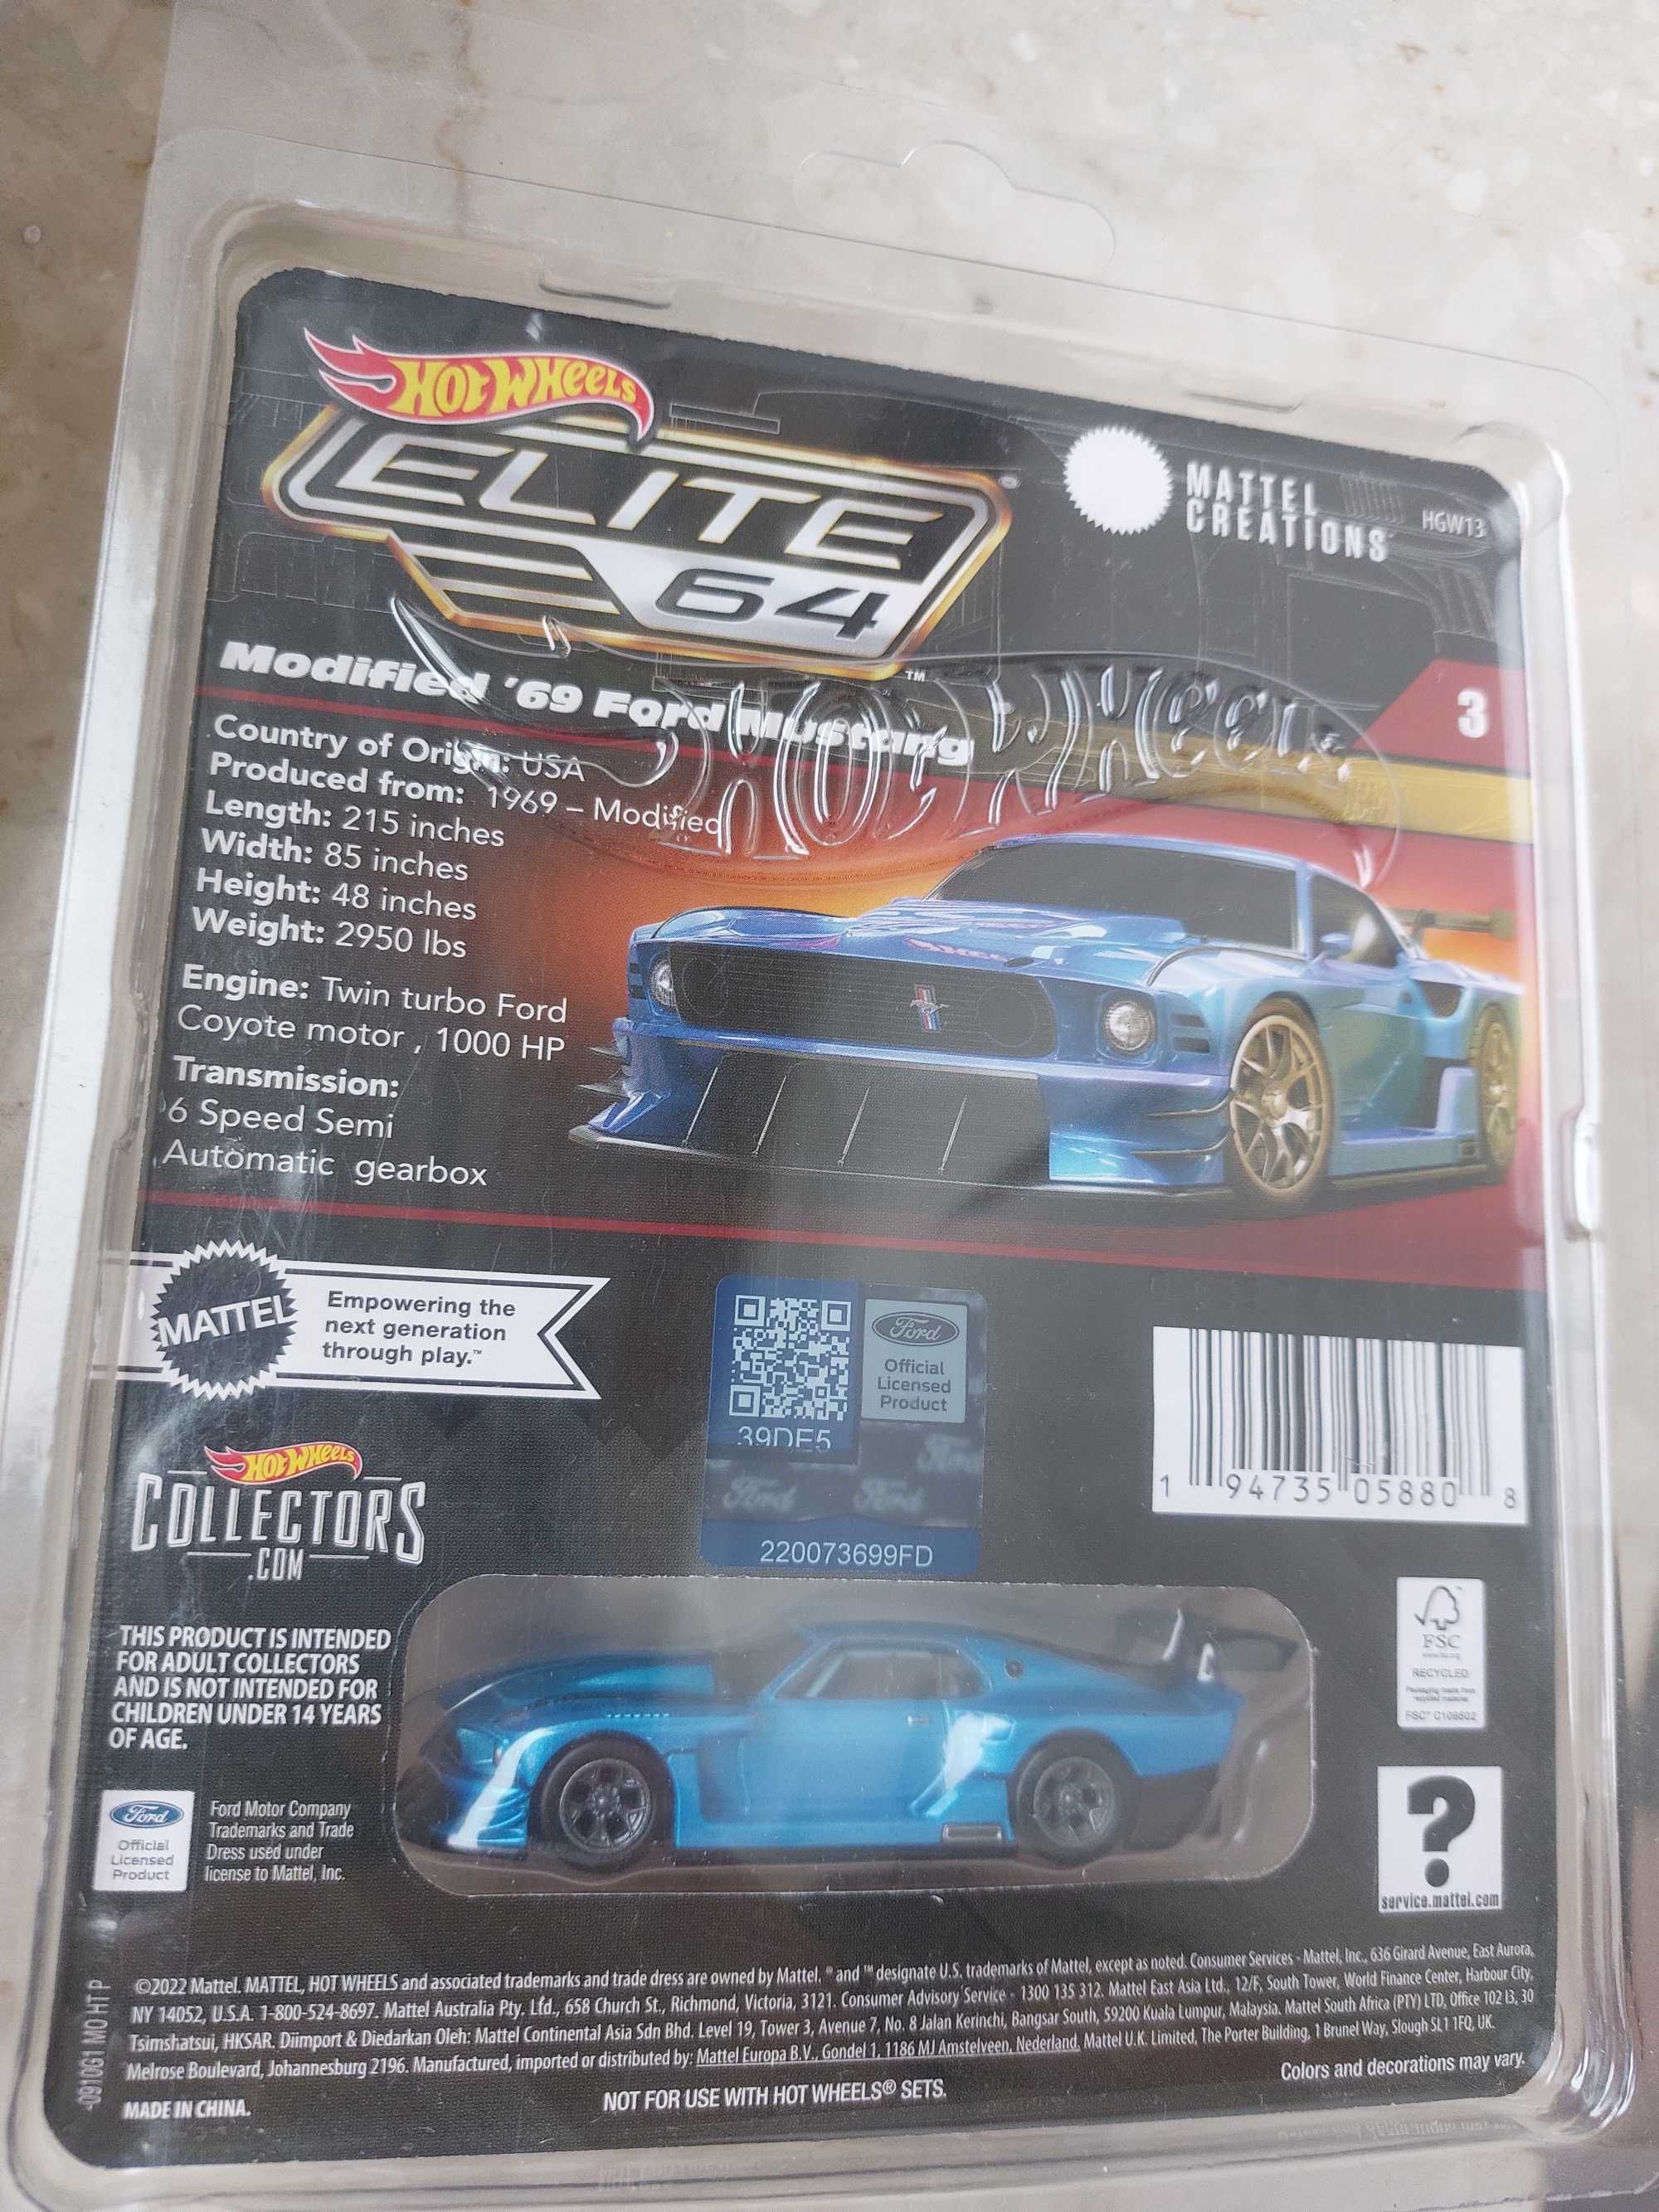 Hot Wheels Ford 69 Mustang Elite 64 Modified